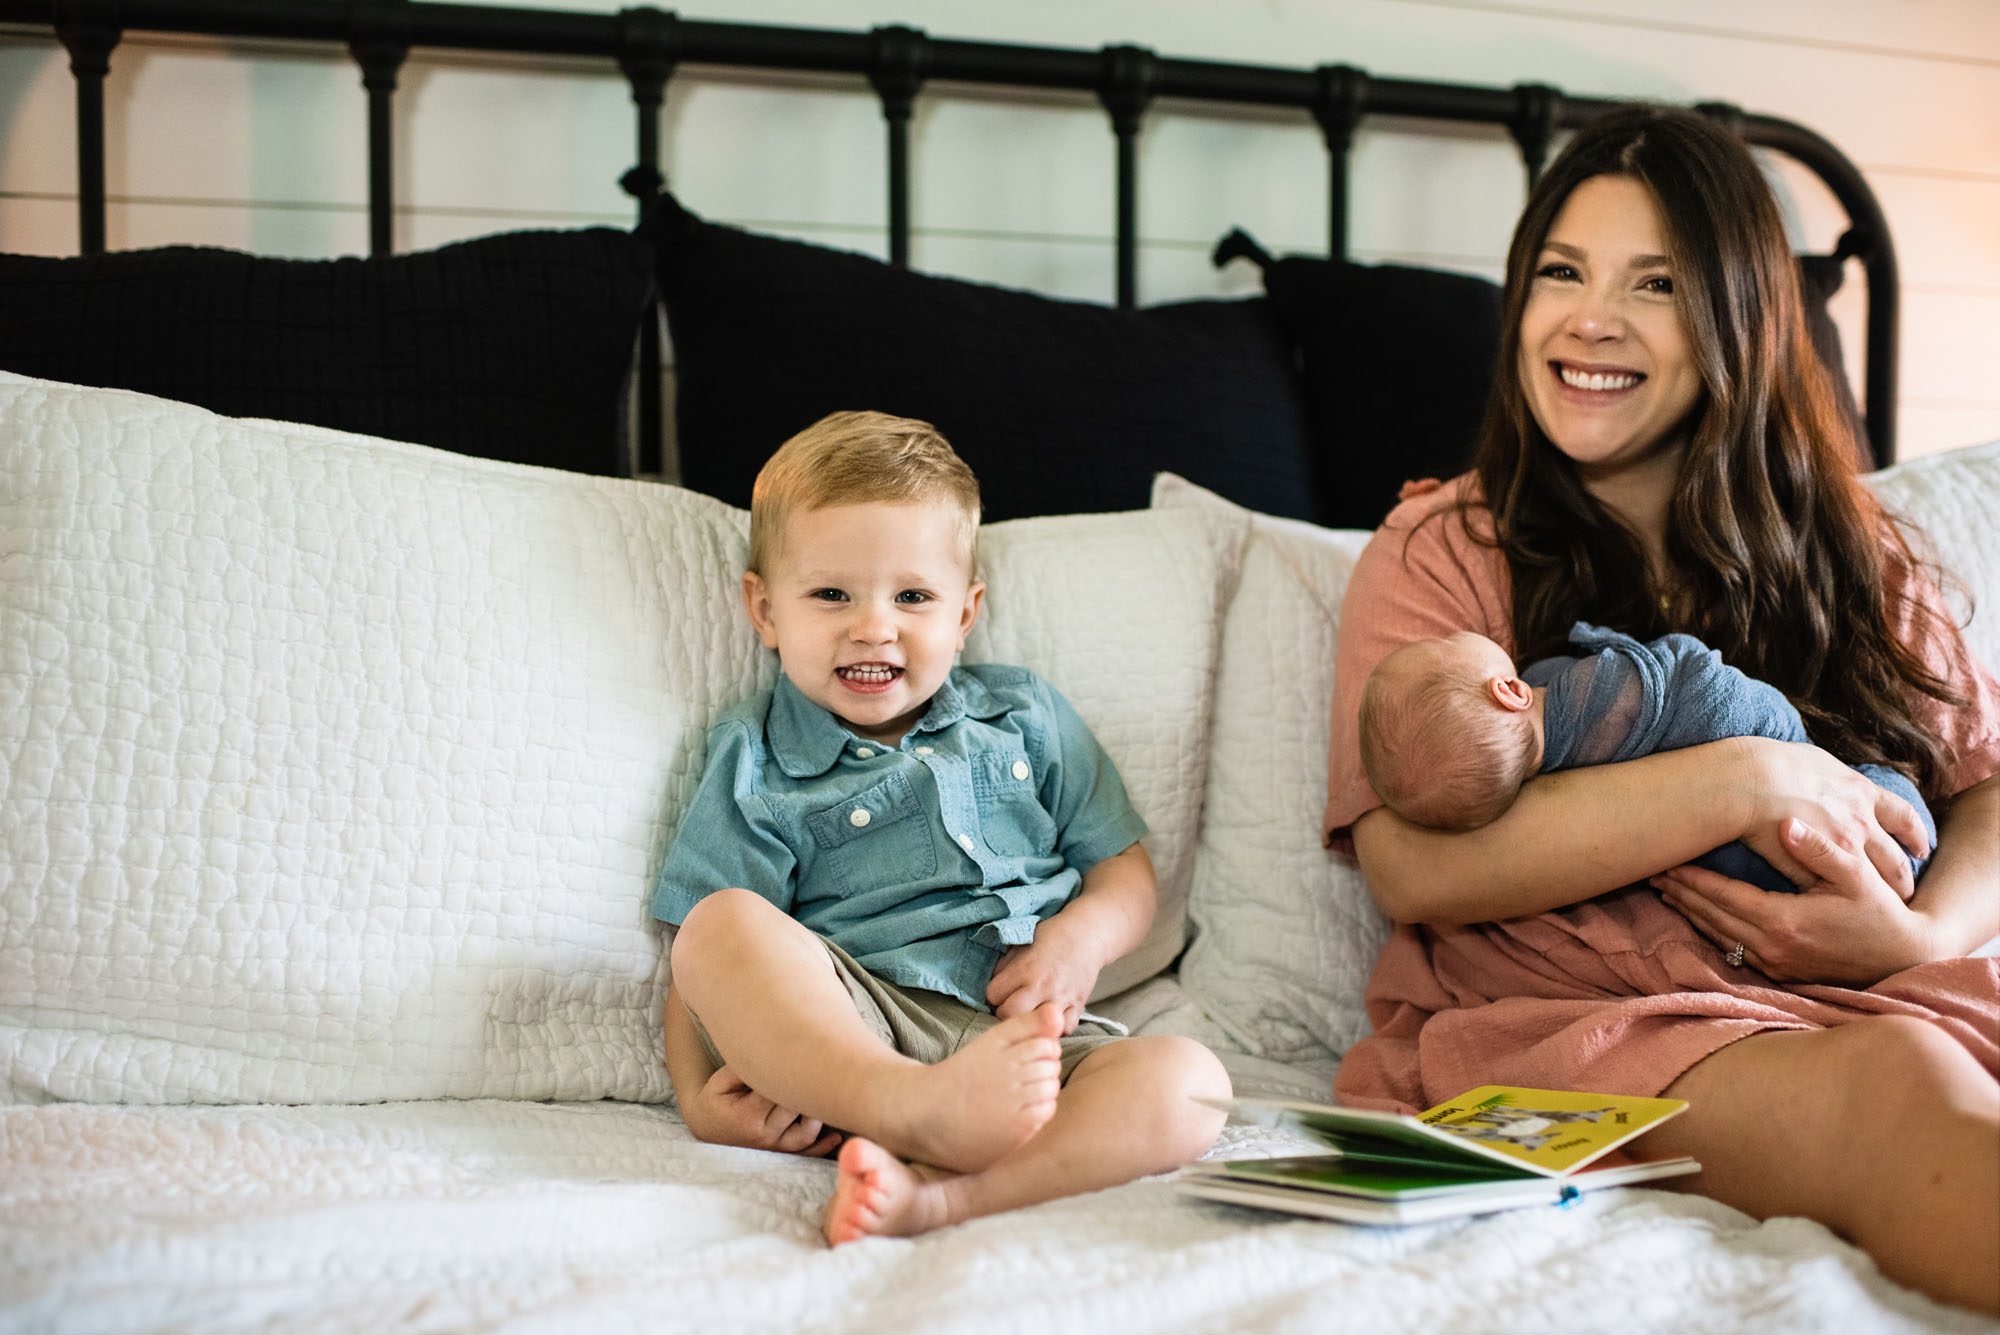 Toddler smiling on bed with mother and baby, San Antonio newborn photographer